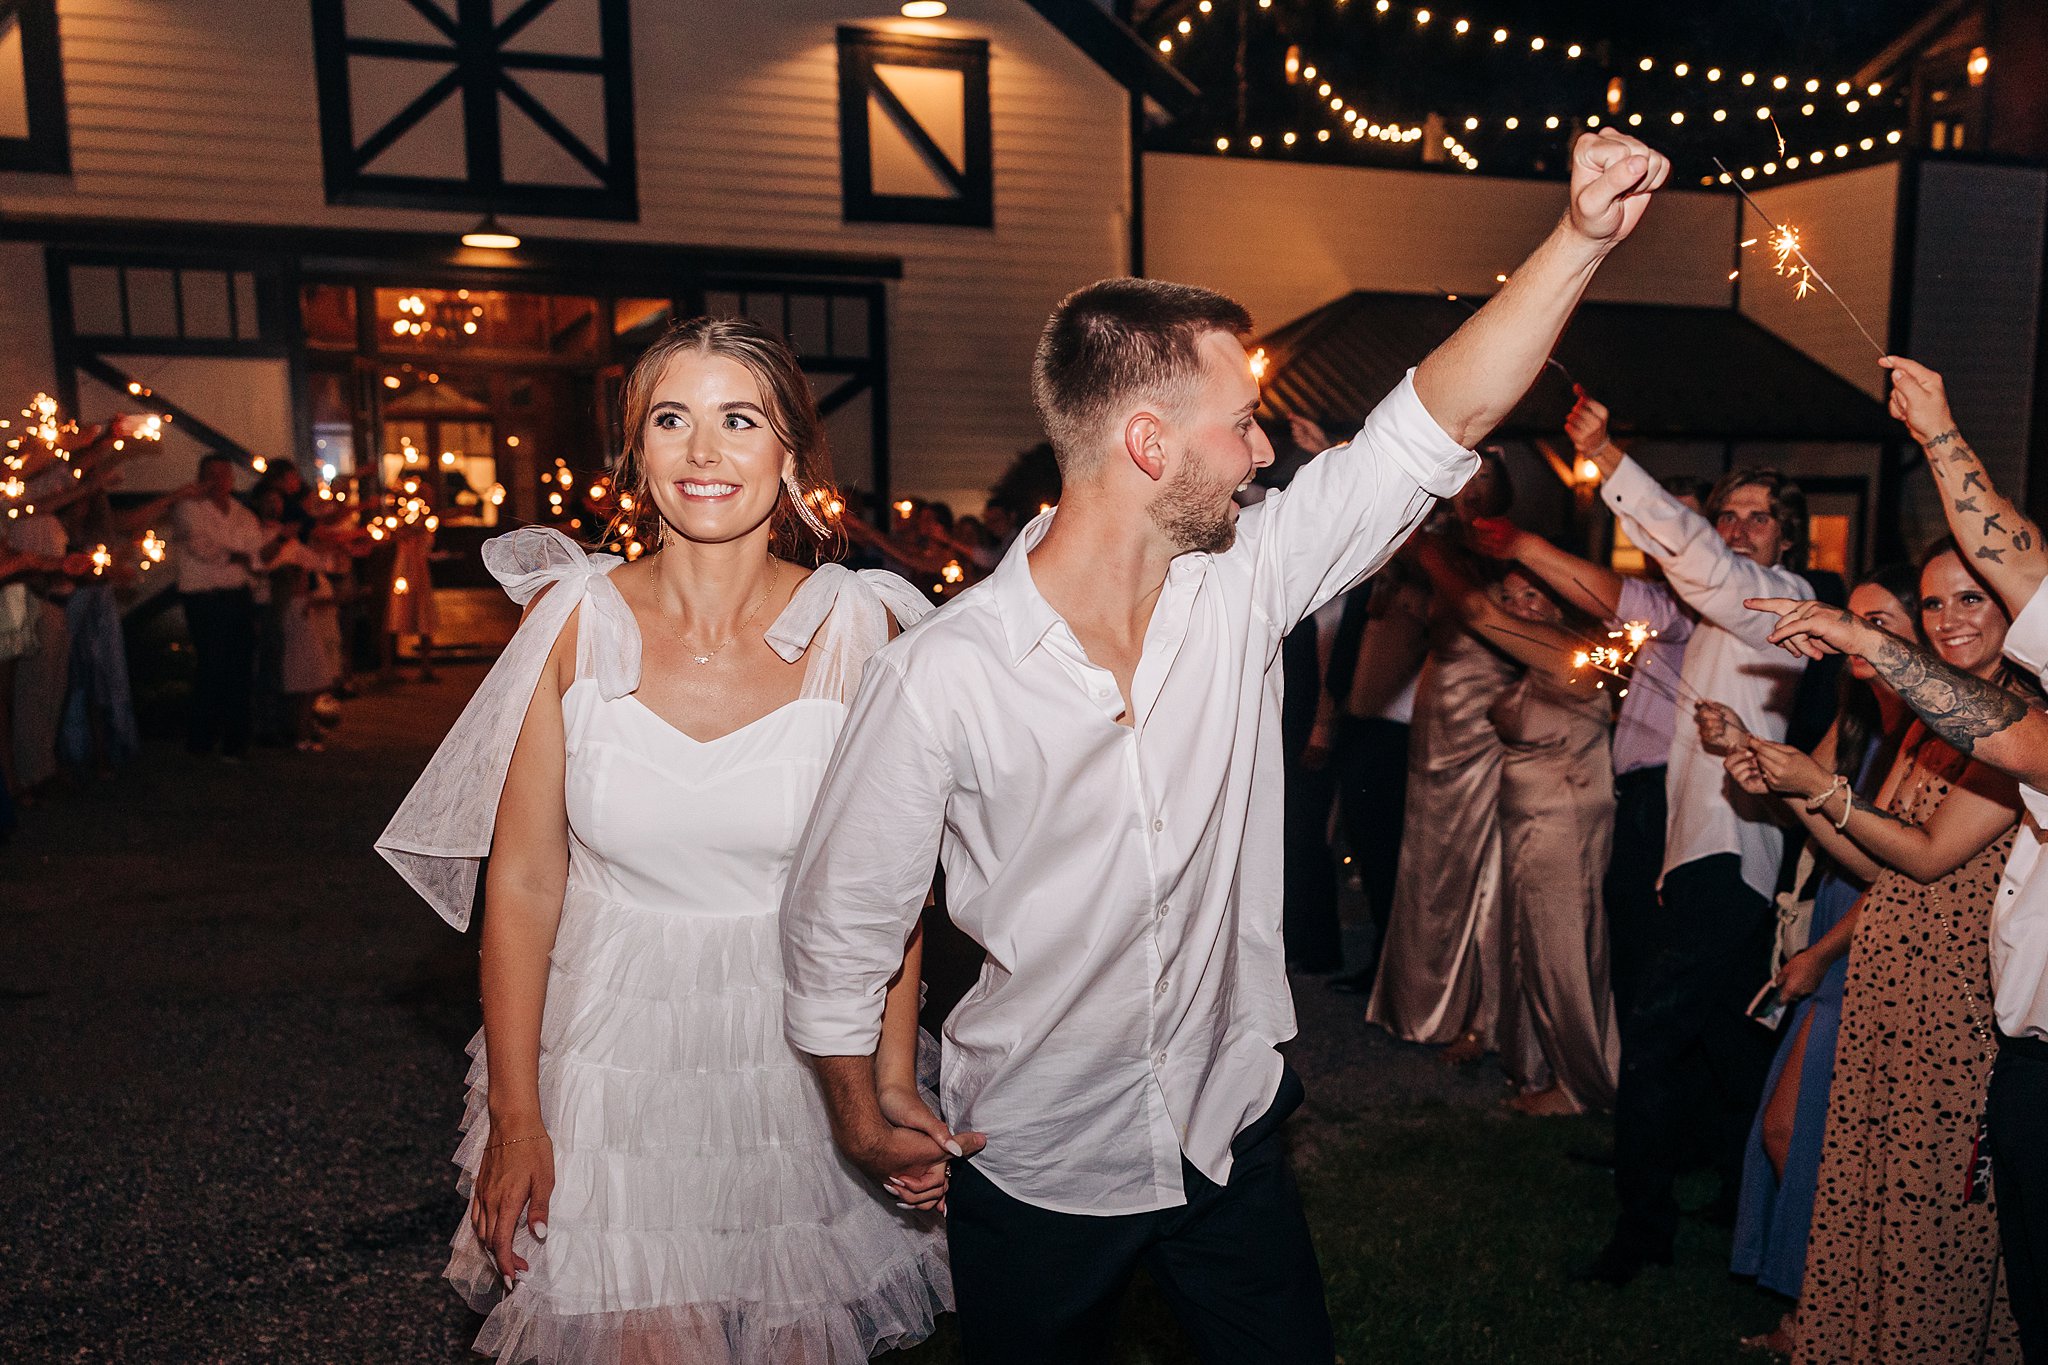 Newlyweds exit their Summerfield Farms wedding under sparklers while holding hands and celebrating